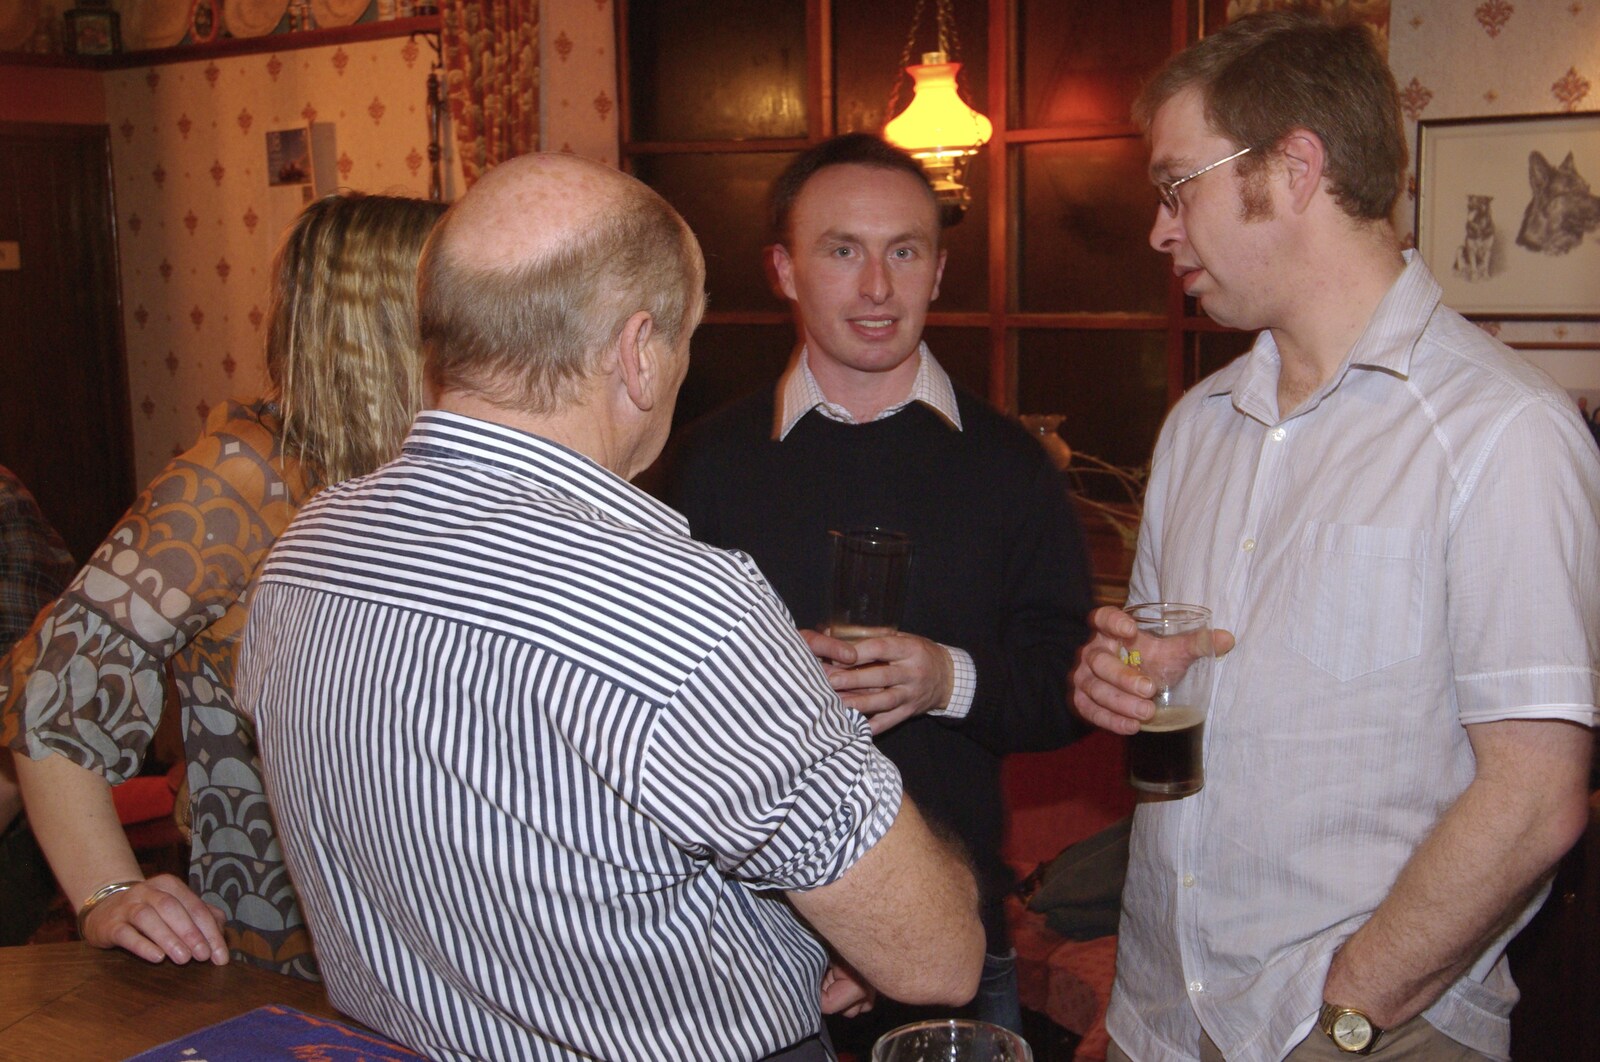 The Swan's 25th Anniversary, Brome, Suffolk - 14th November 2008: Dave L chats with Mick the Brick and Marc